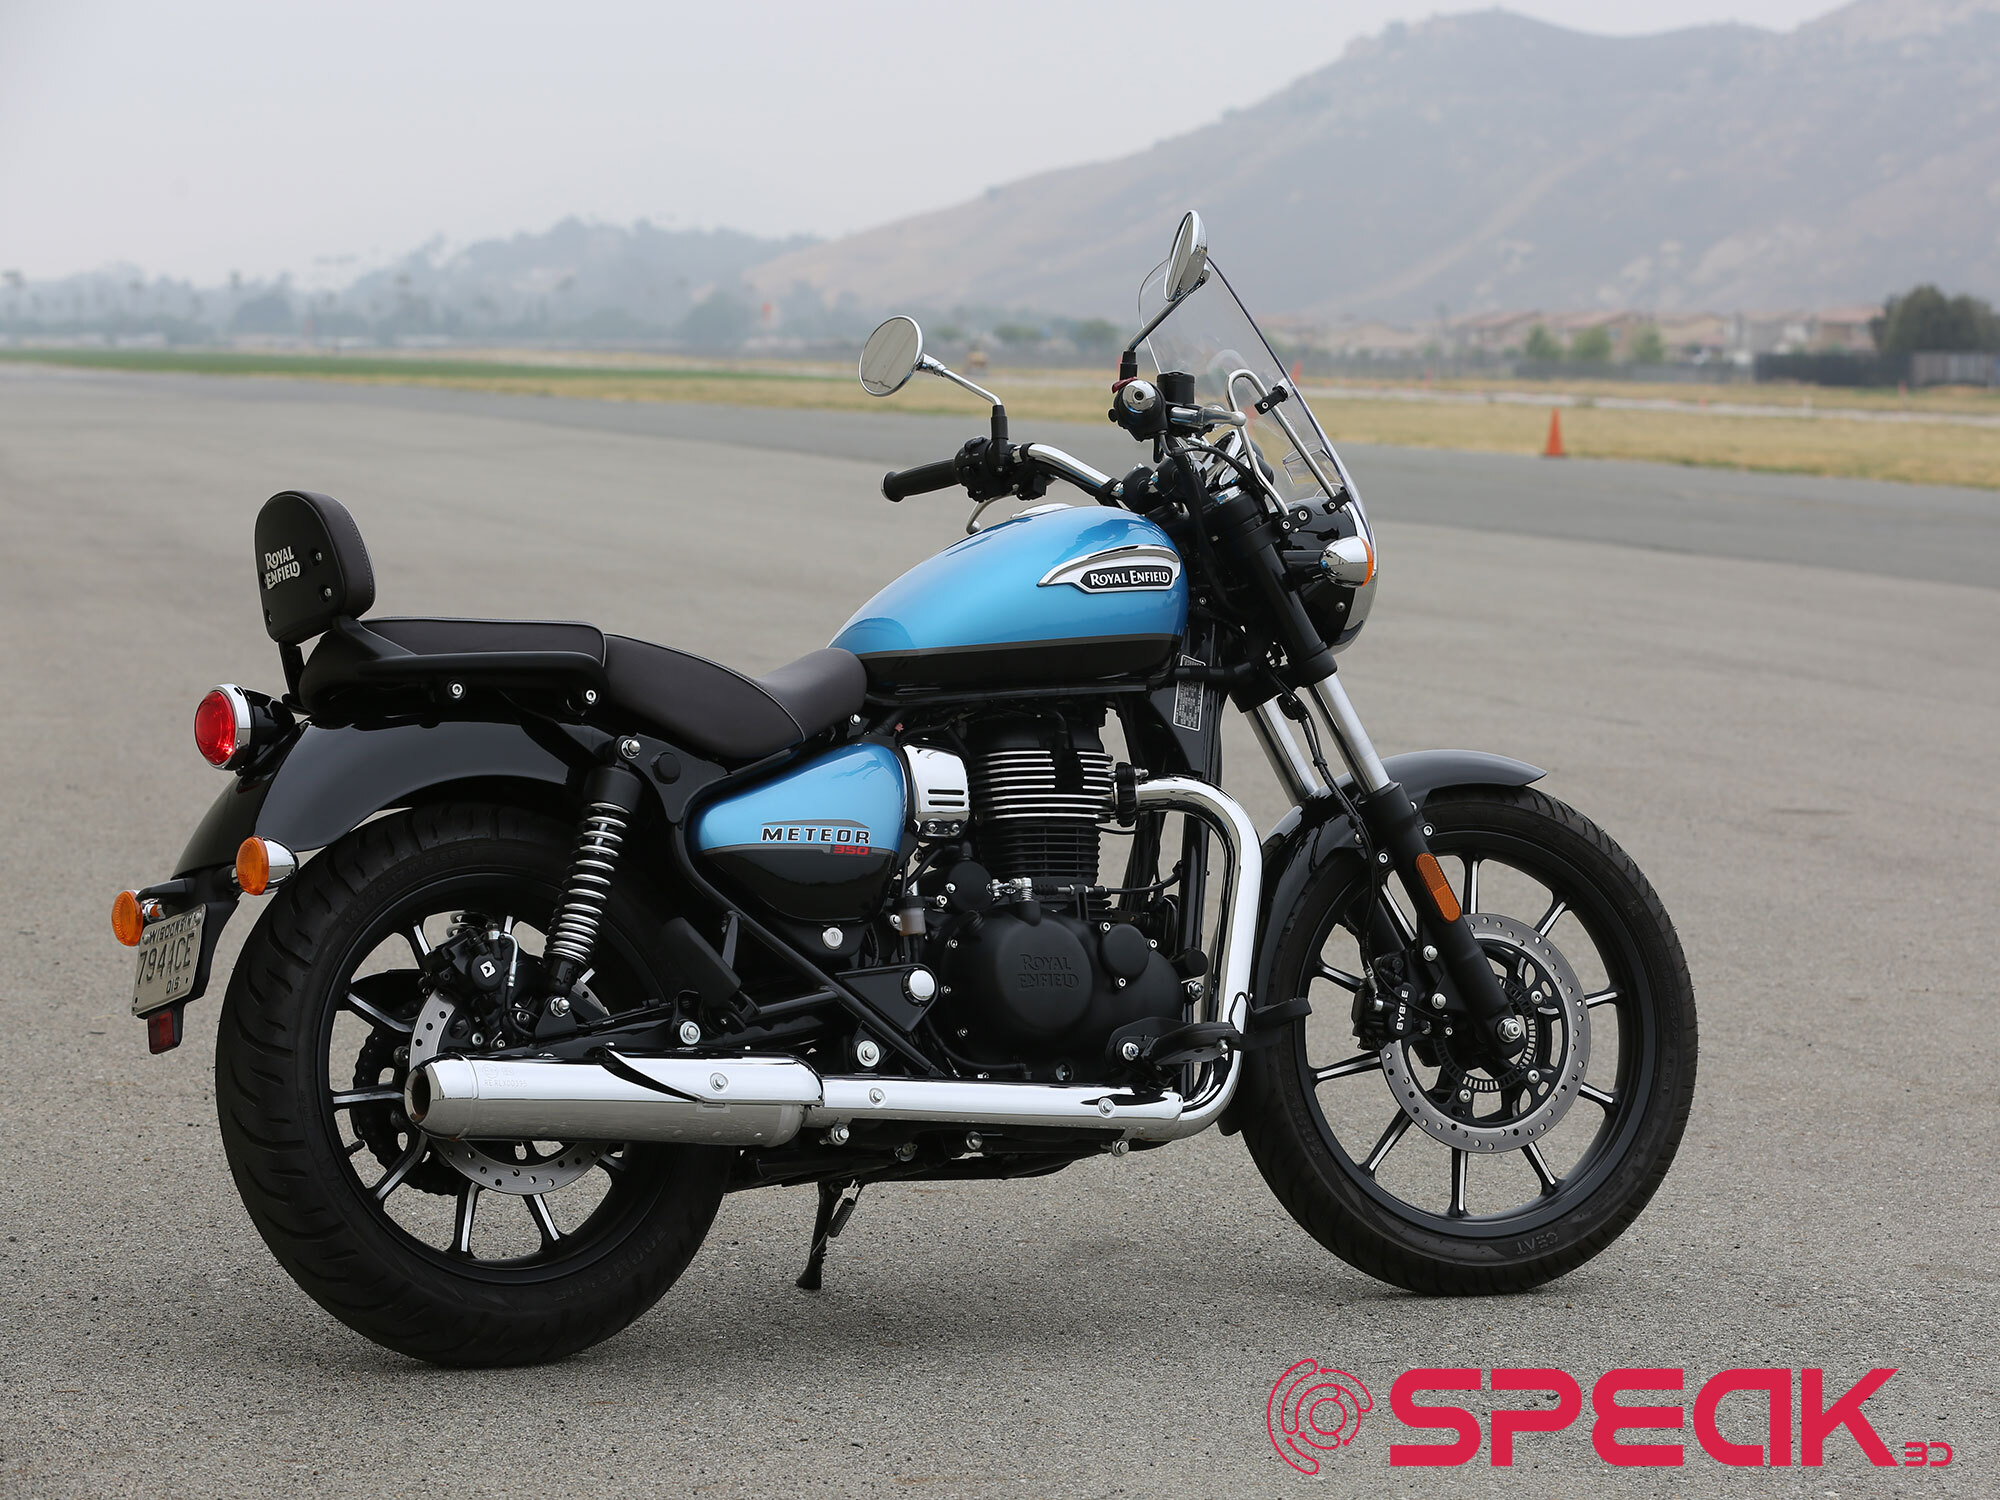 Royal Enfield Meteor 350 - Pictures